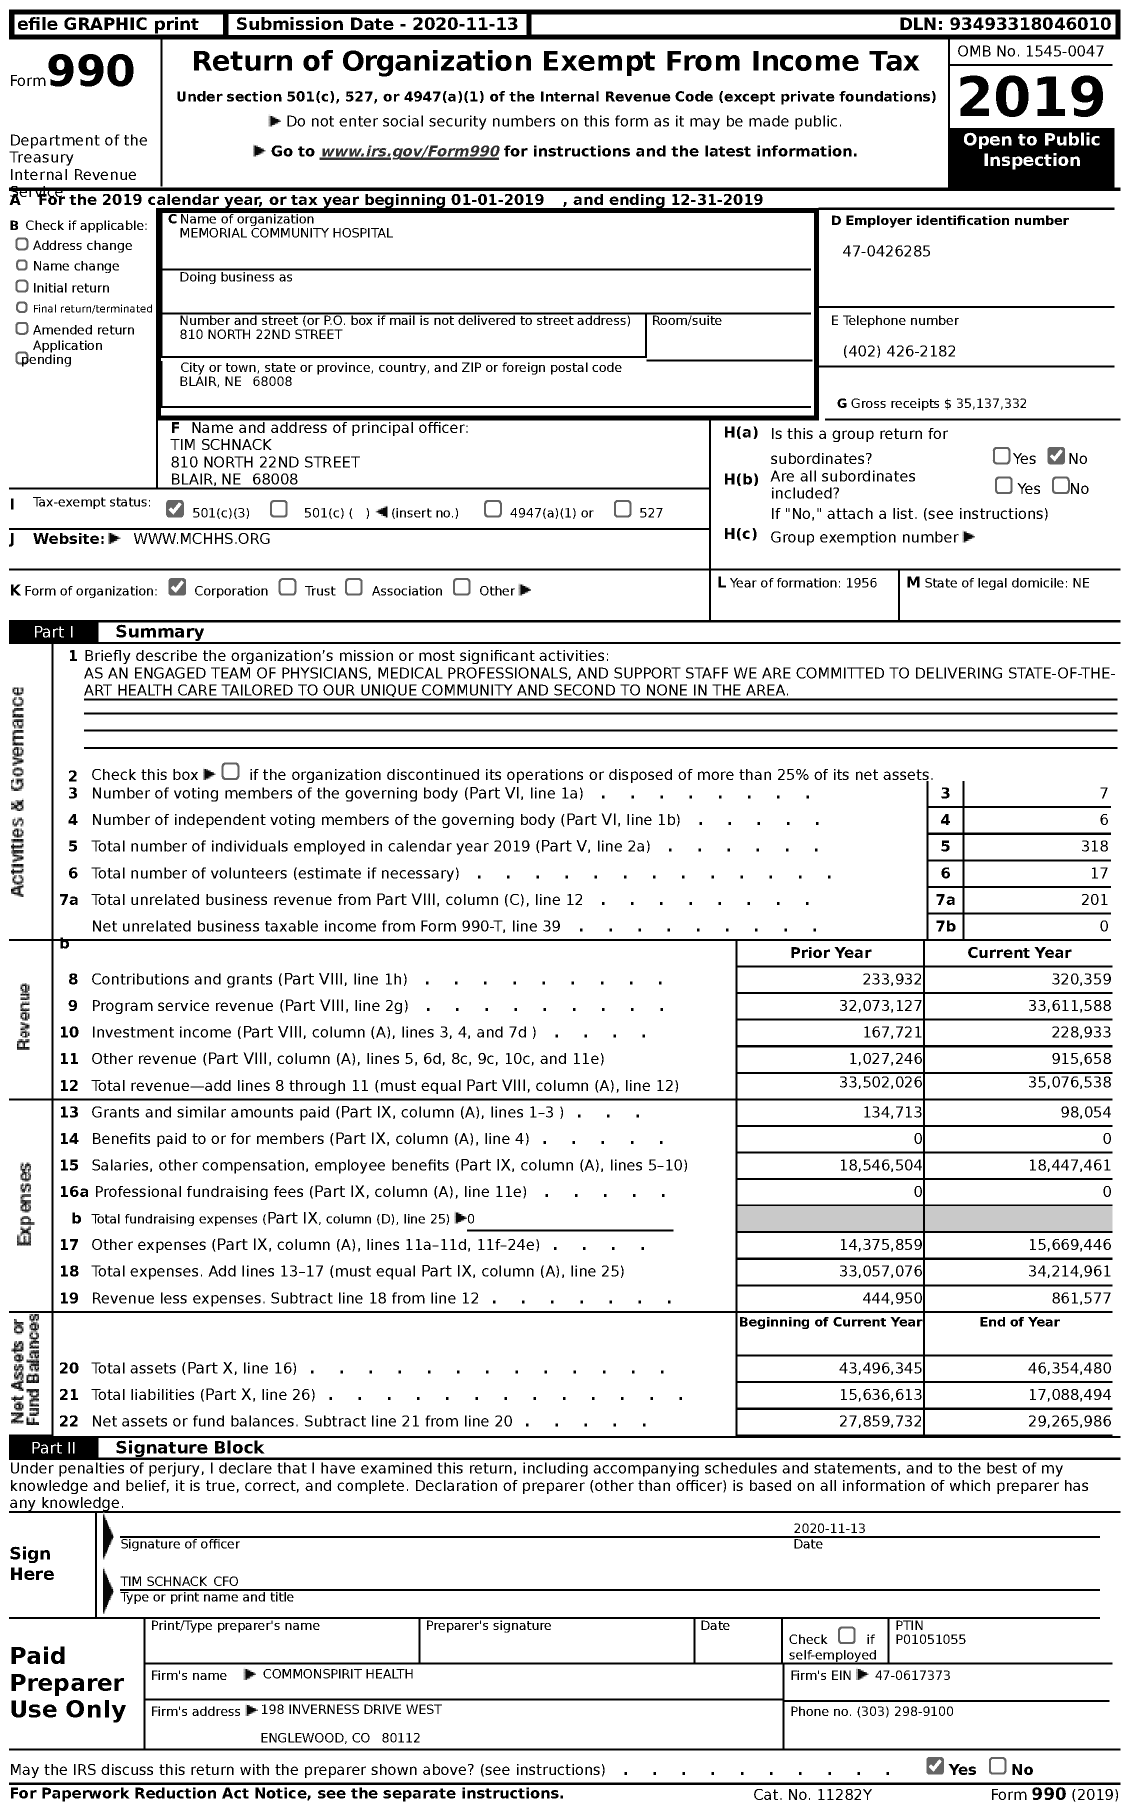 Image of first page of 2019 Form 990 for Memorial Community Hospital (MCH&HS)